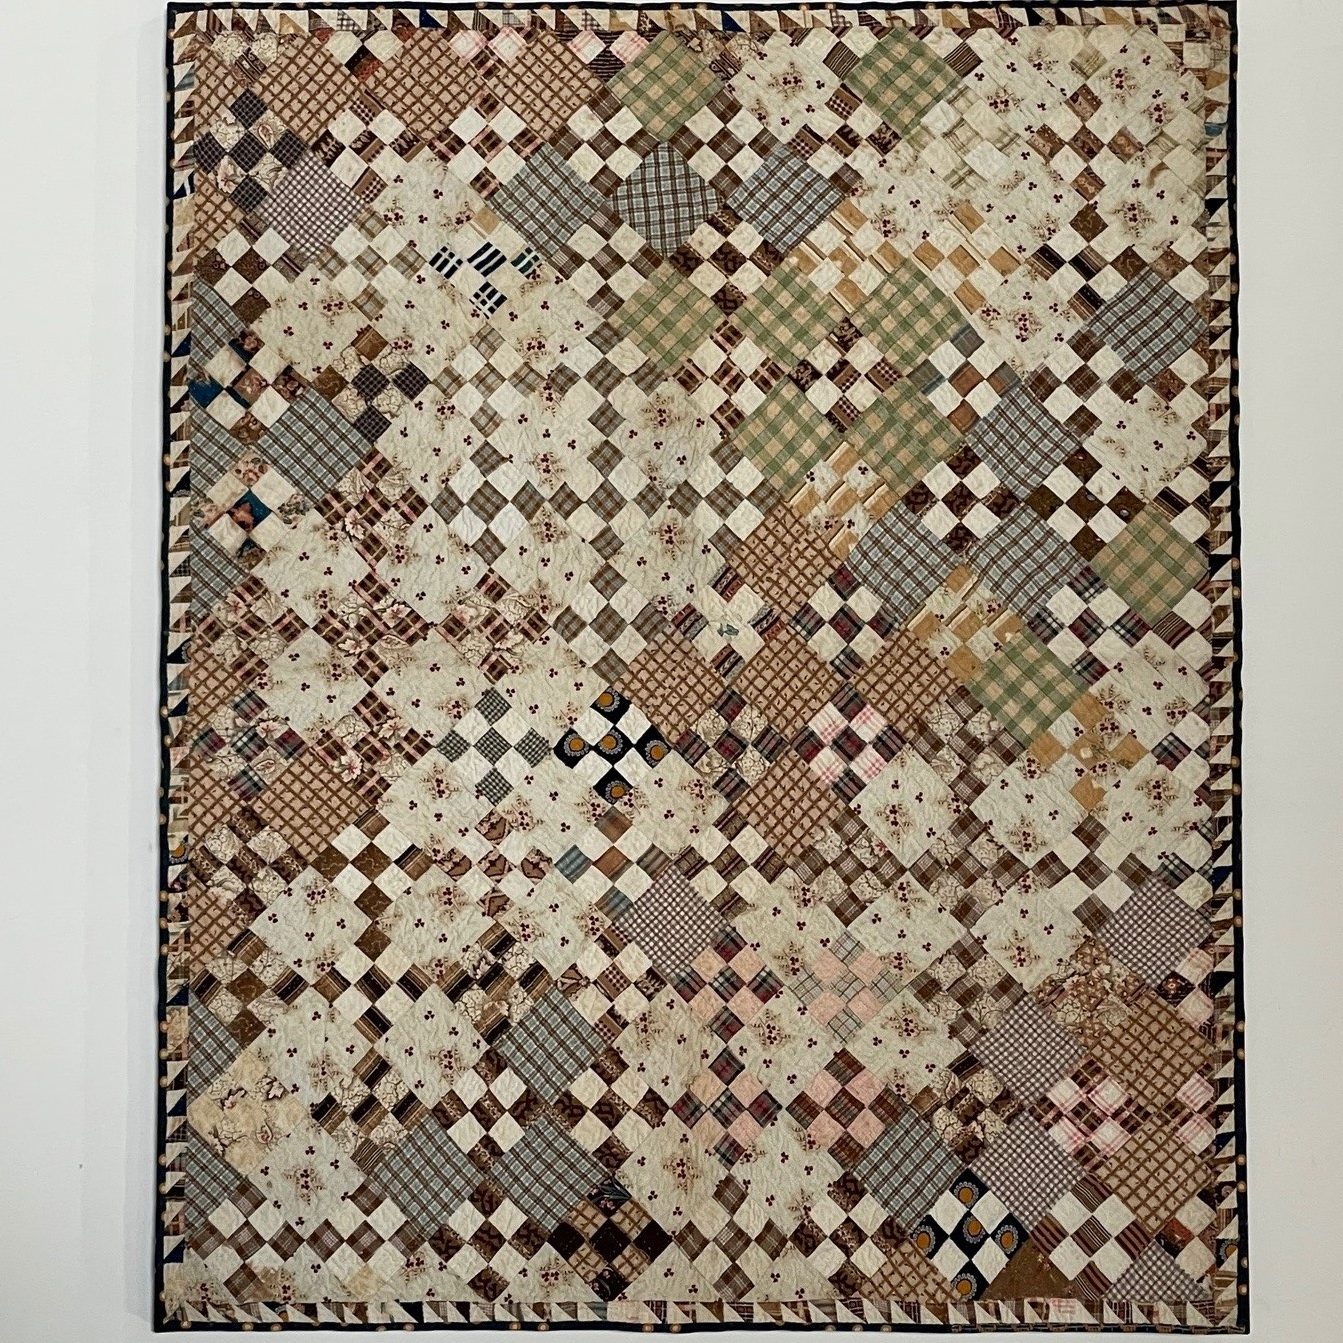 pieced quilted cotton quilt rel=